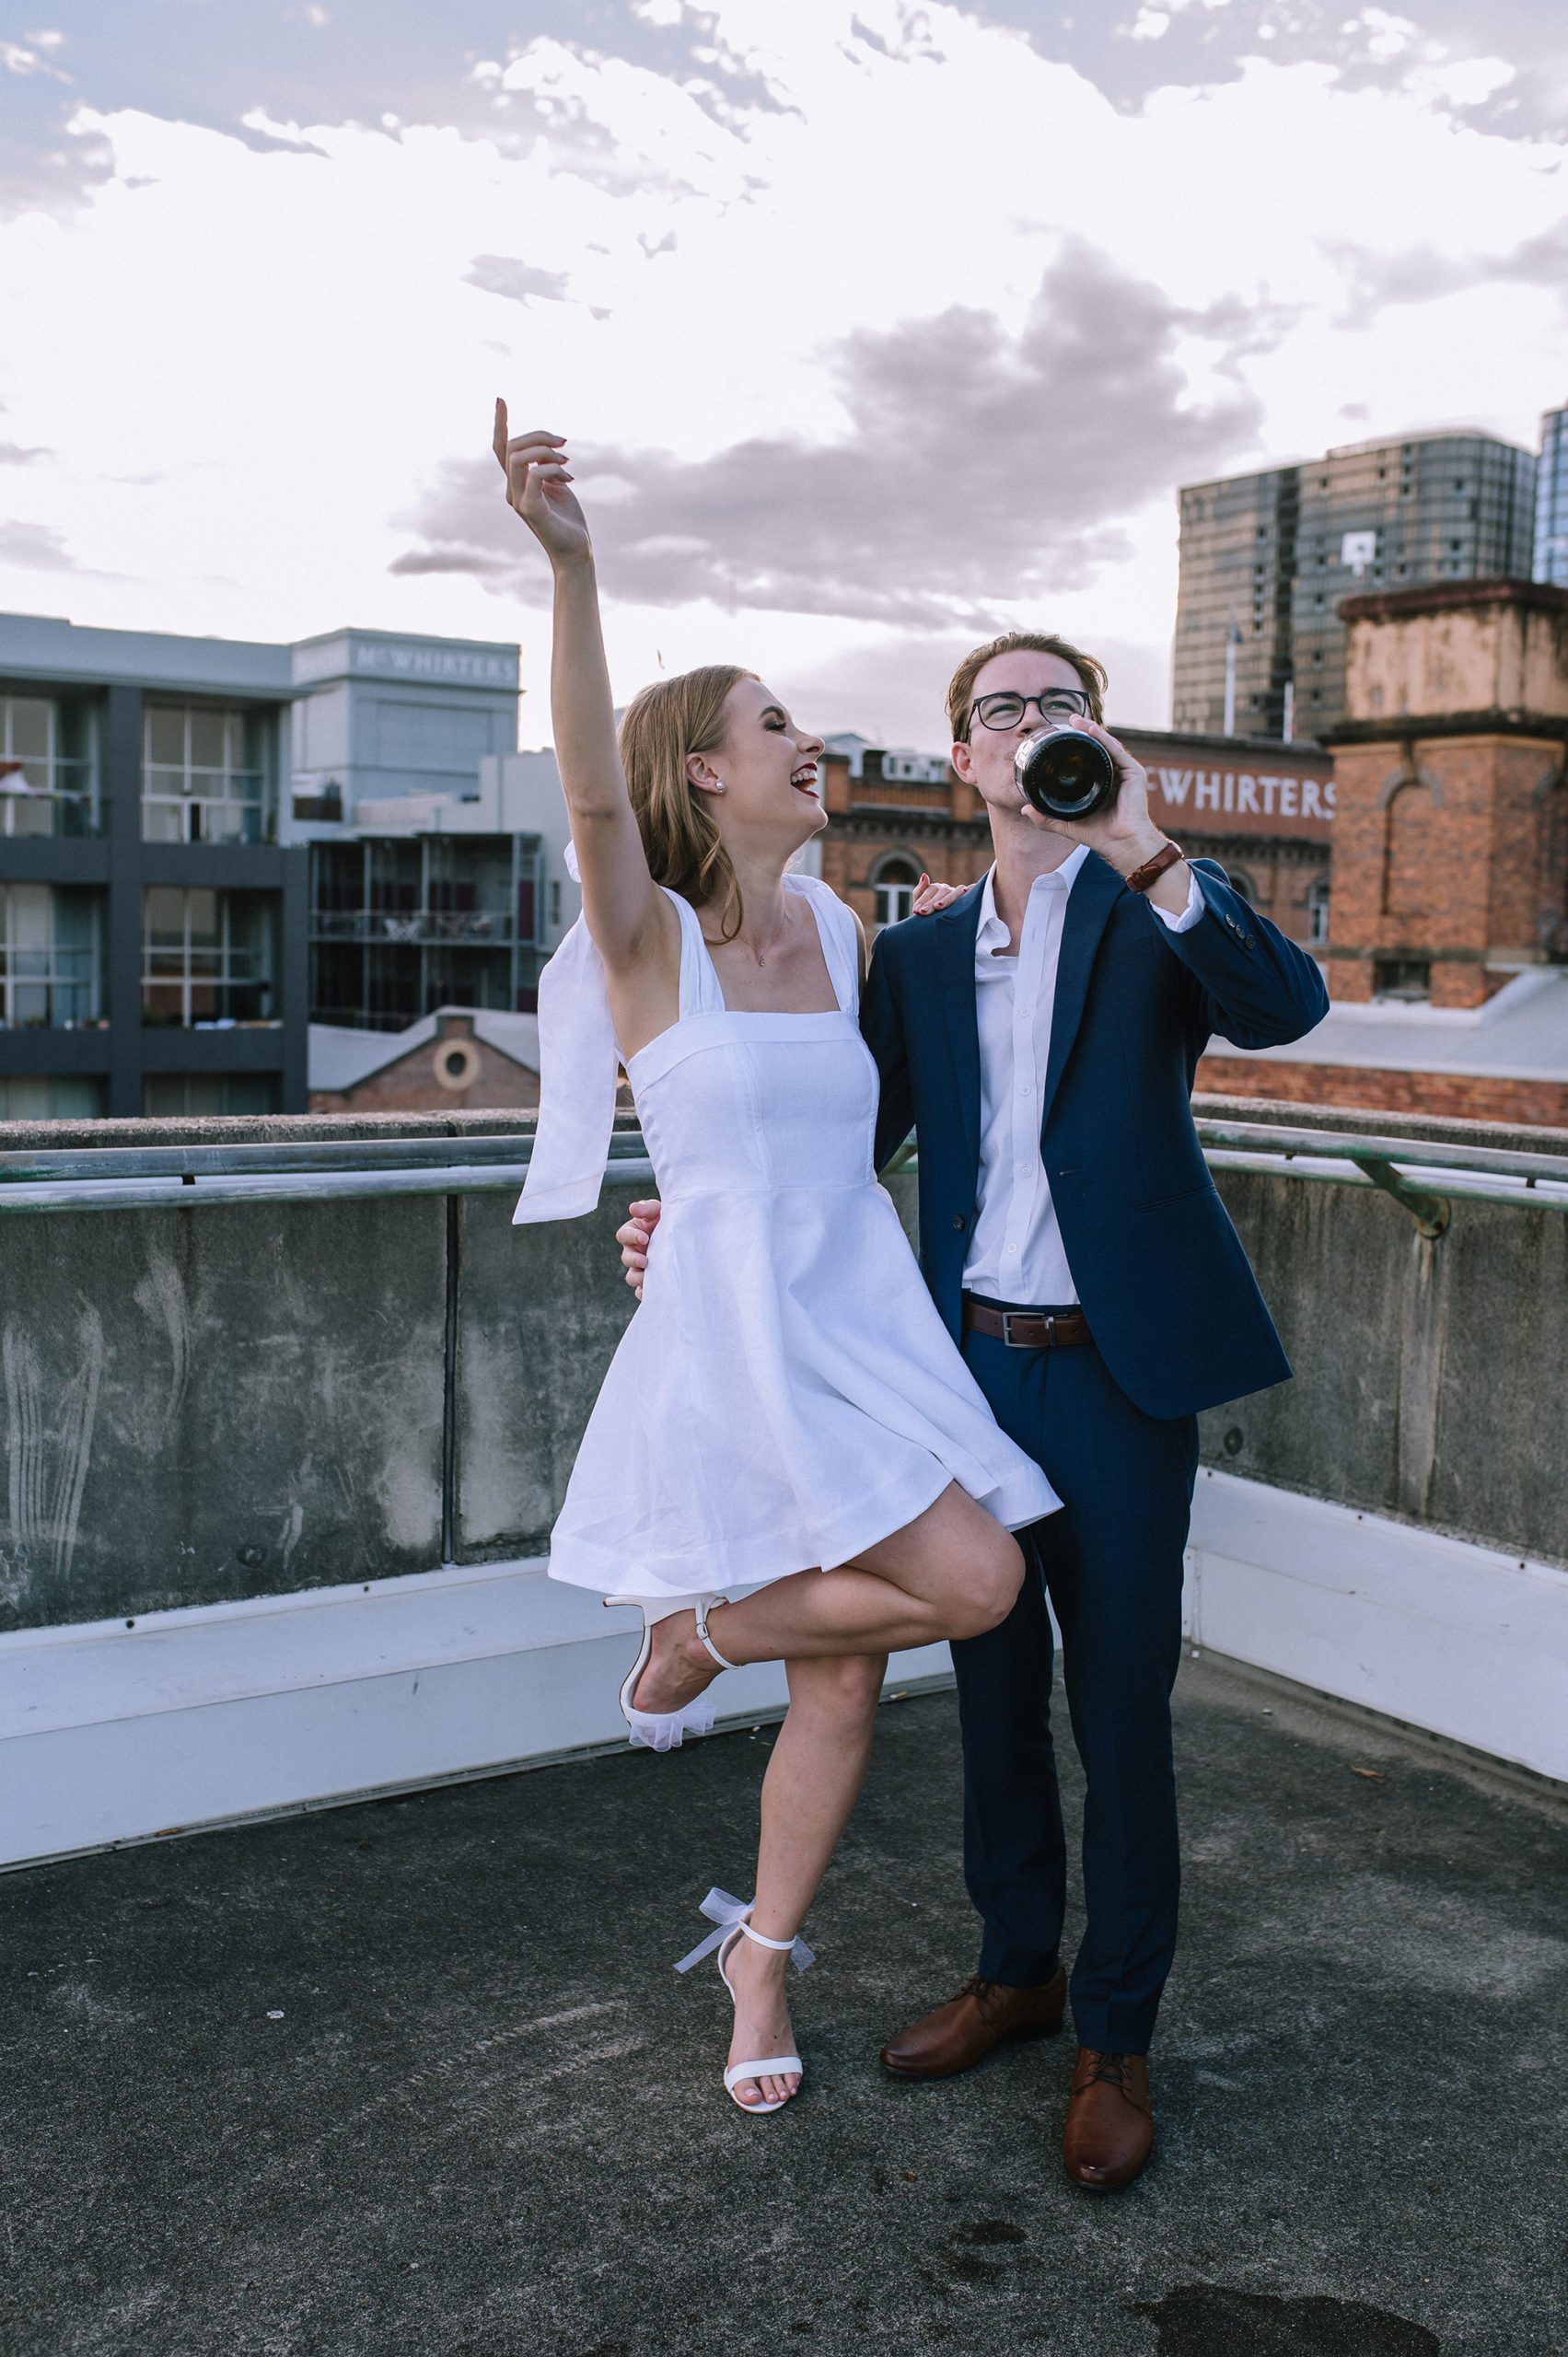 Engaged couple popping champion on rooftop during their engagement photography session; with Tayla Jayne Photography